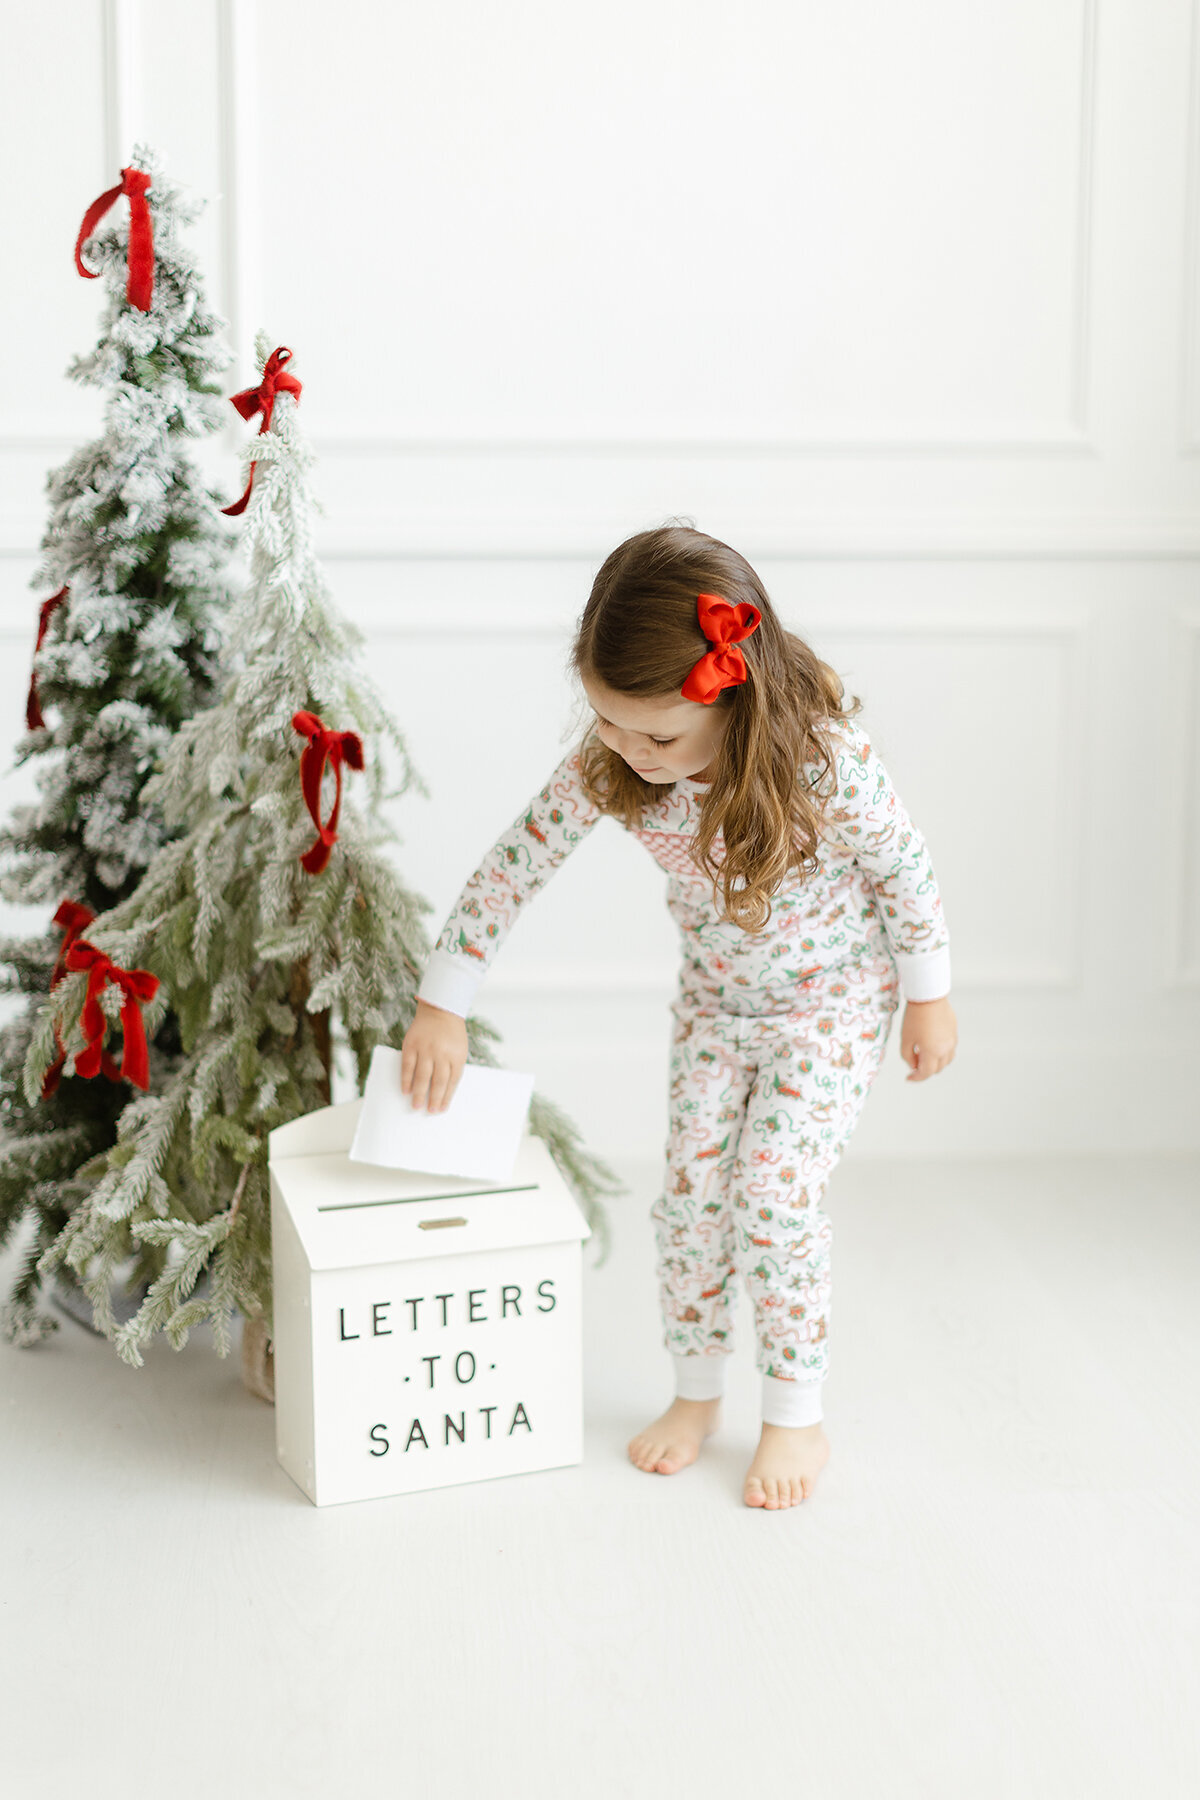 A little girl putting a letter in a "Letters to Santa" box - Dondolo branding session